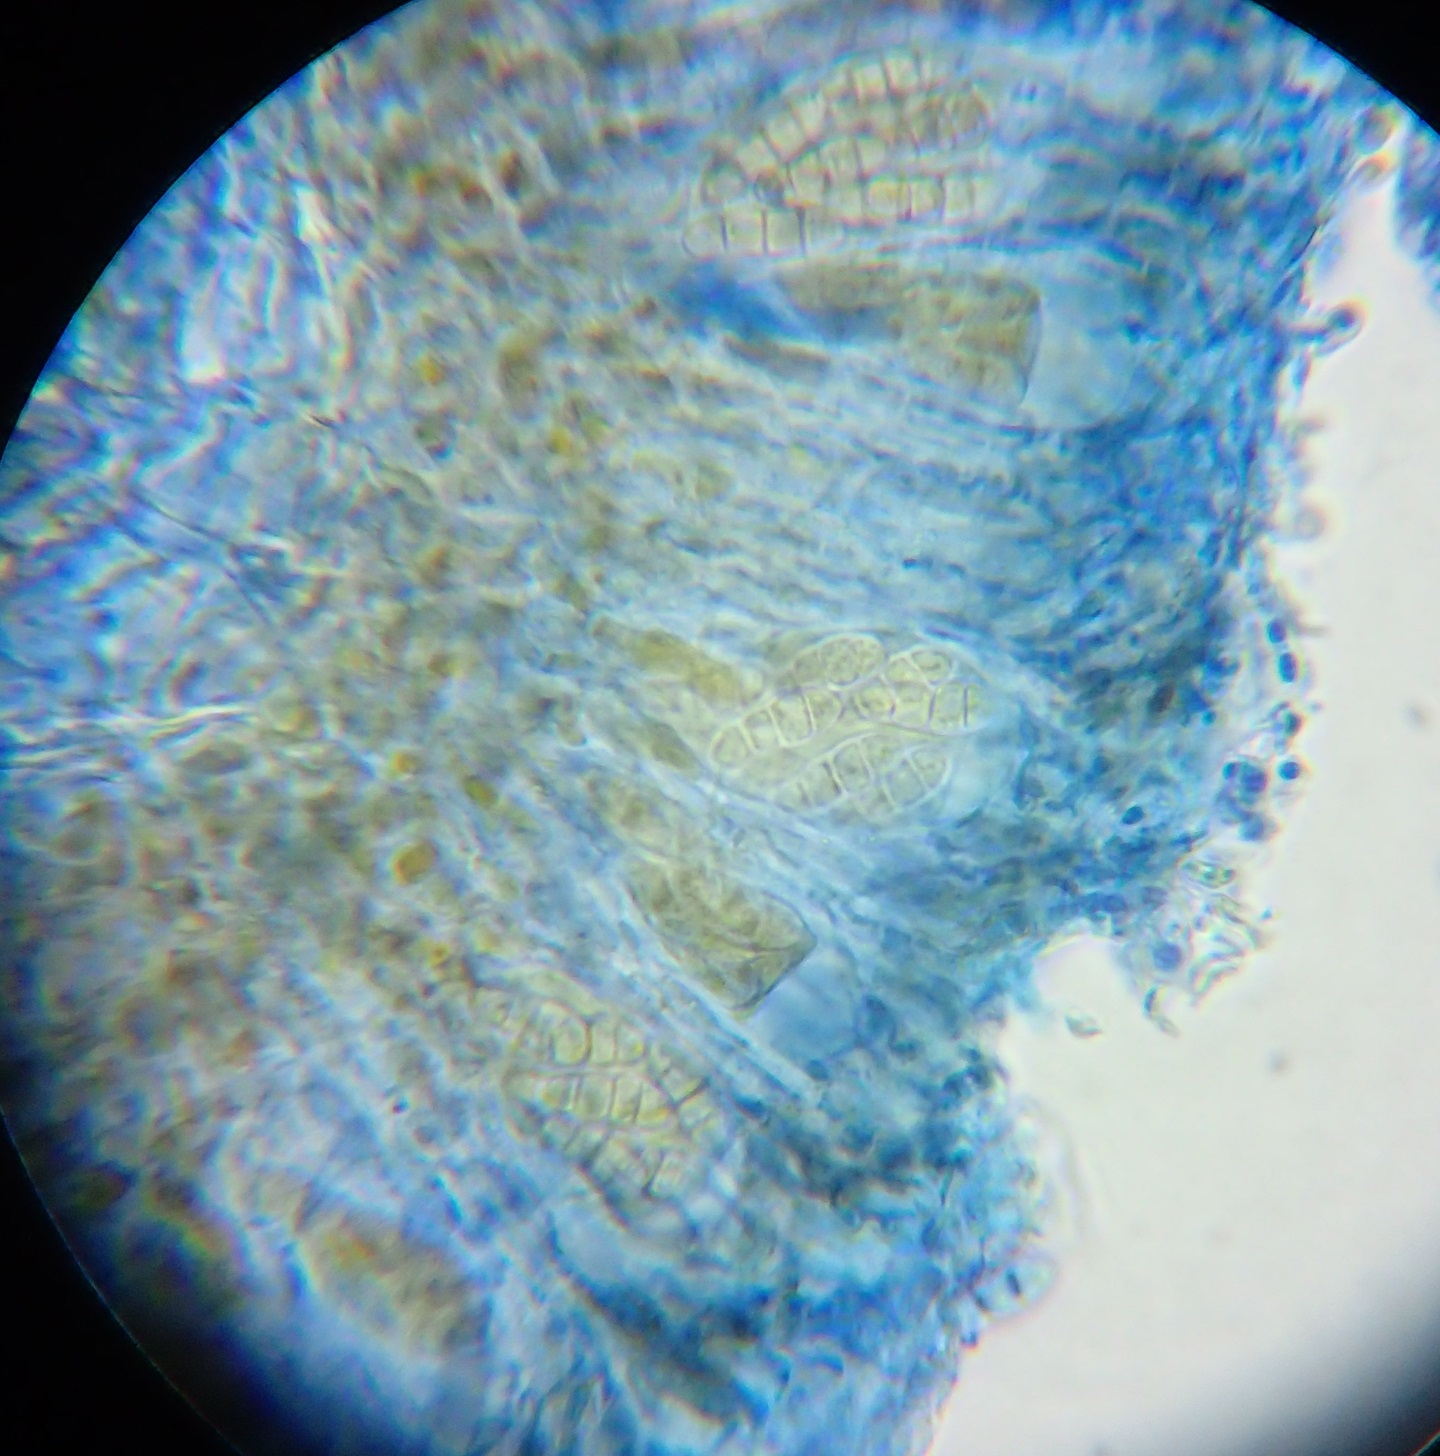 Arthonia radiata: section stained to show spores in asci